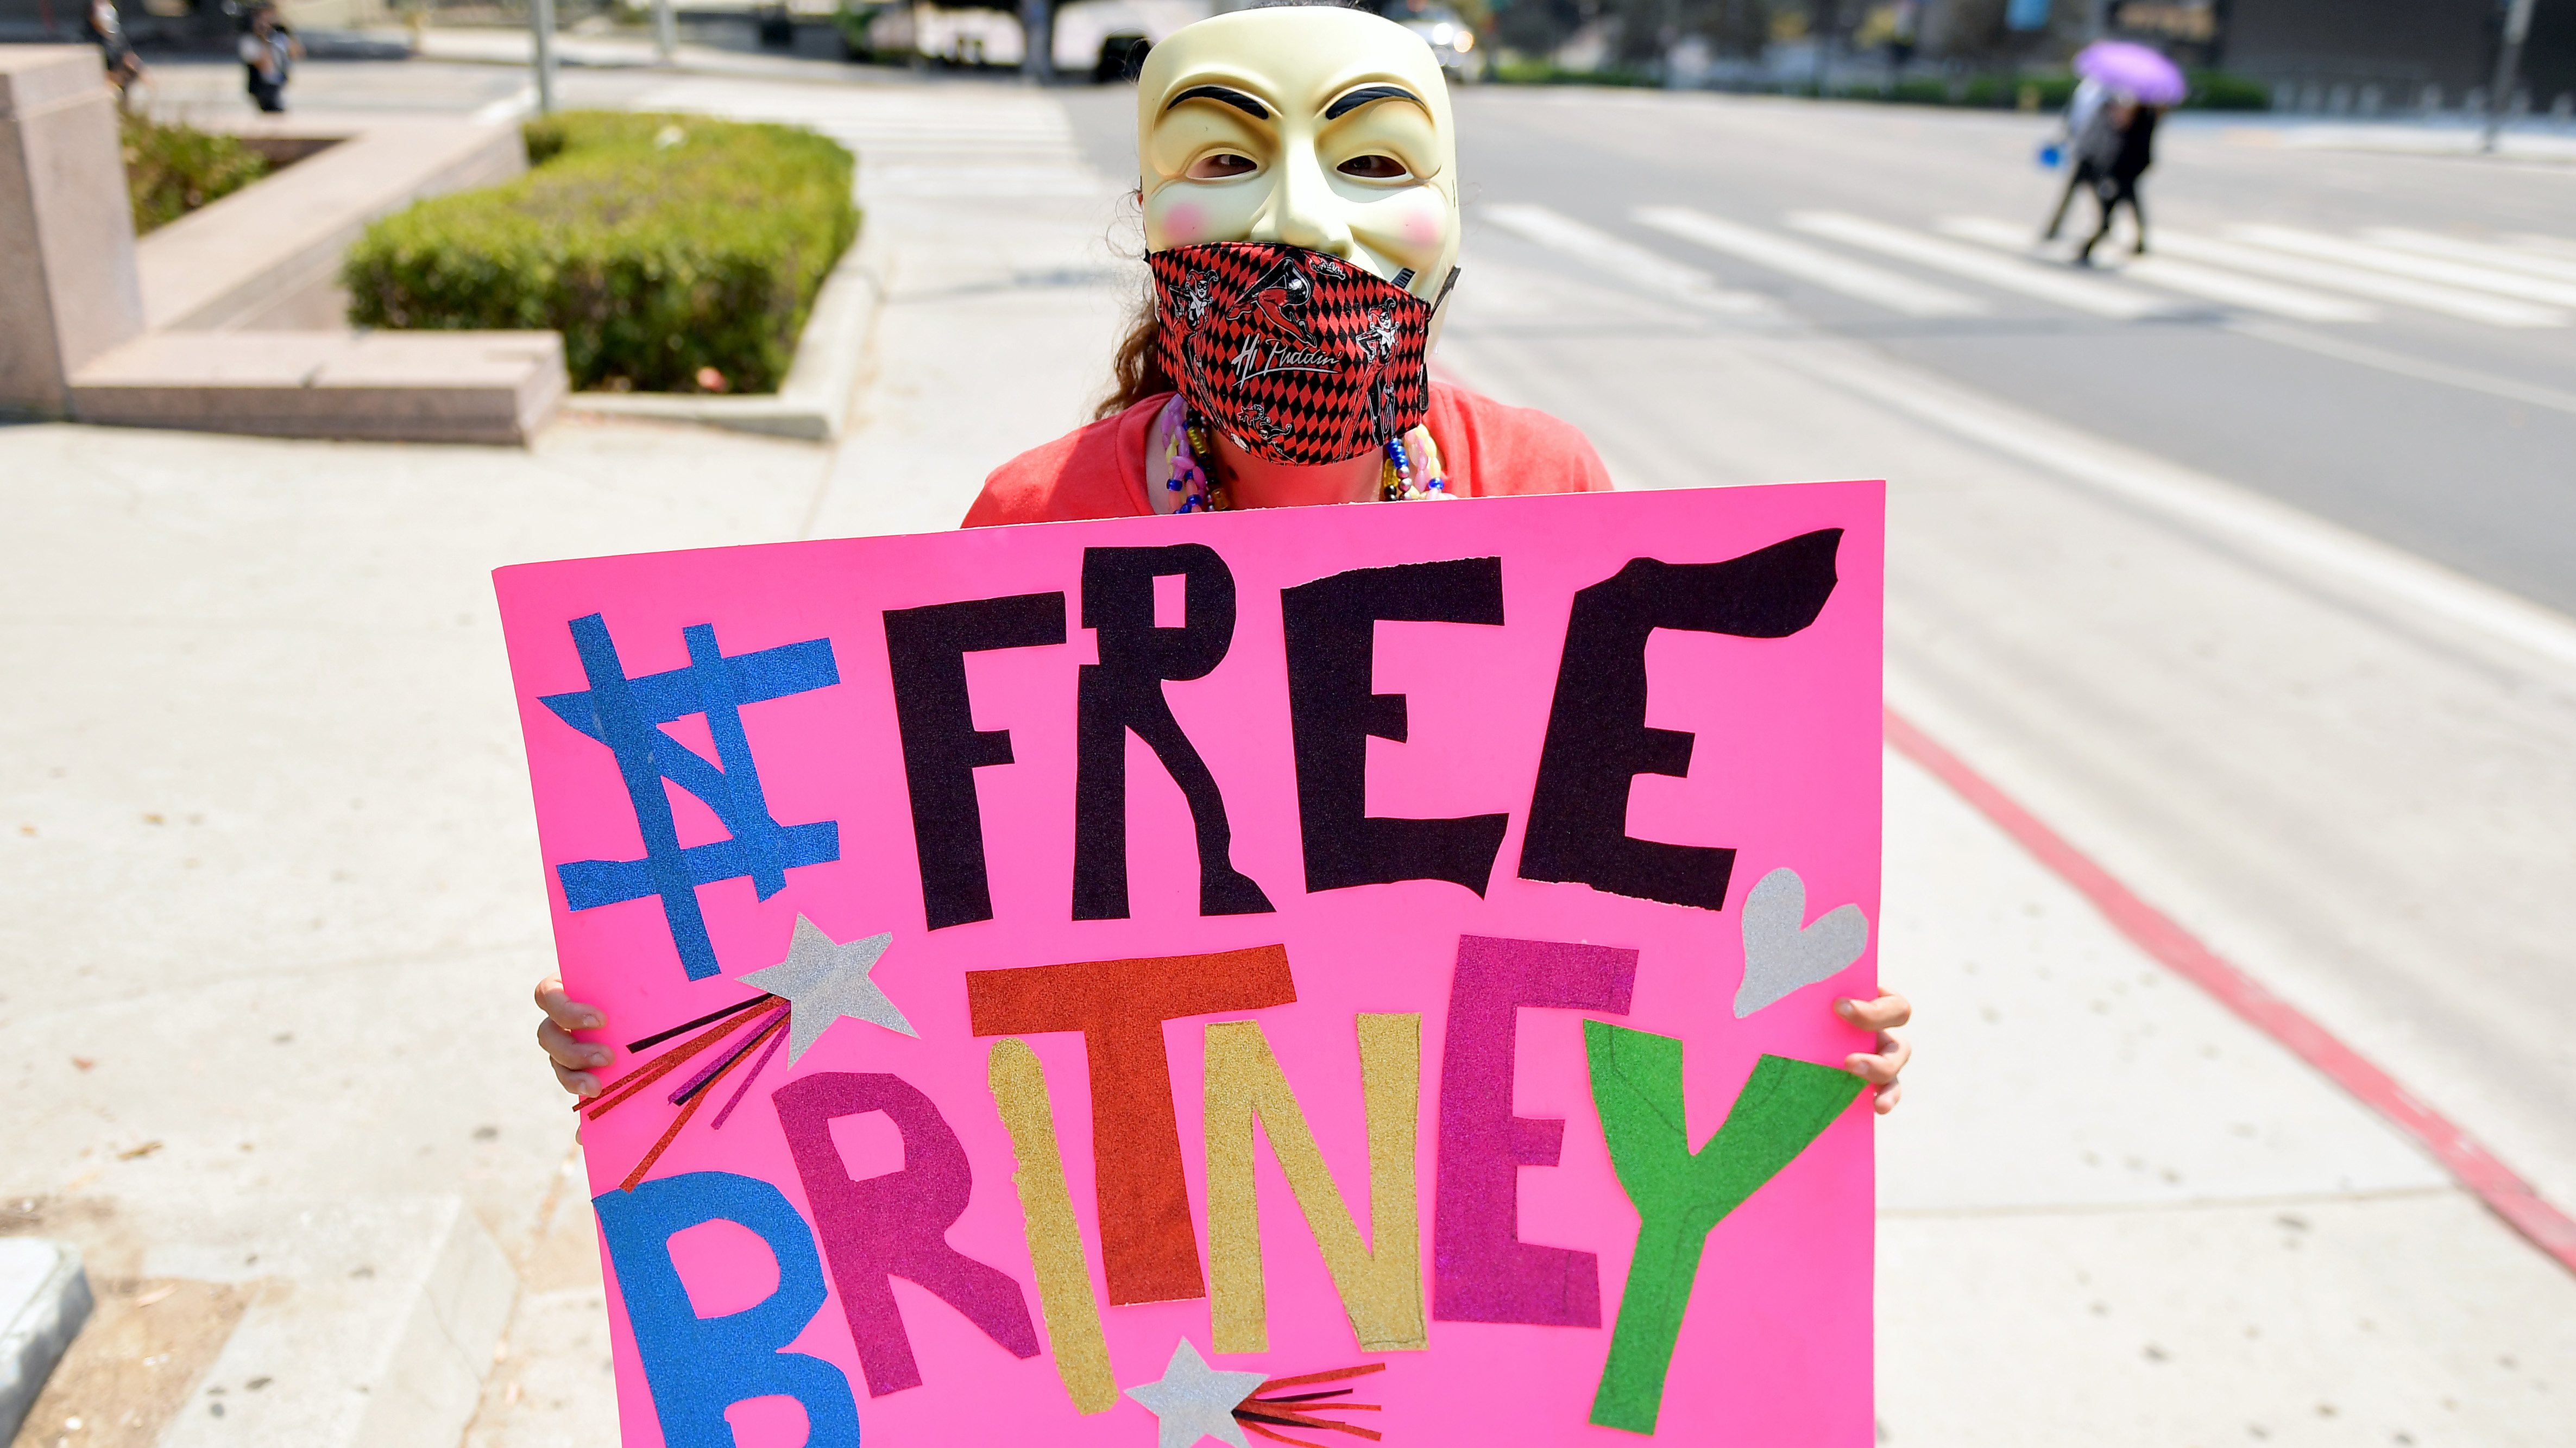 #FreeBritney Protest Outside Courthouse In Los Angeles During Conservatorship Hearing